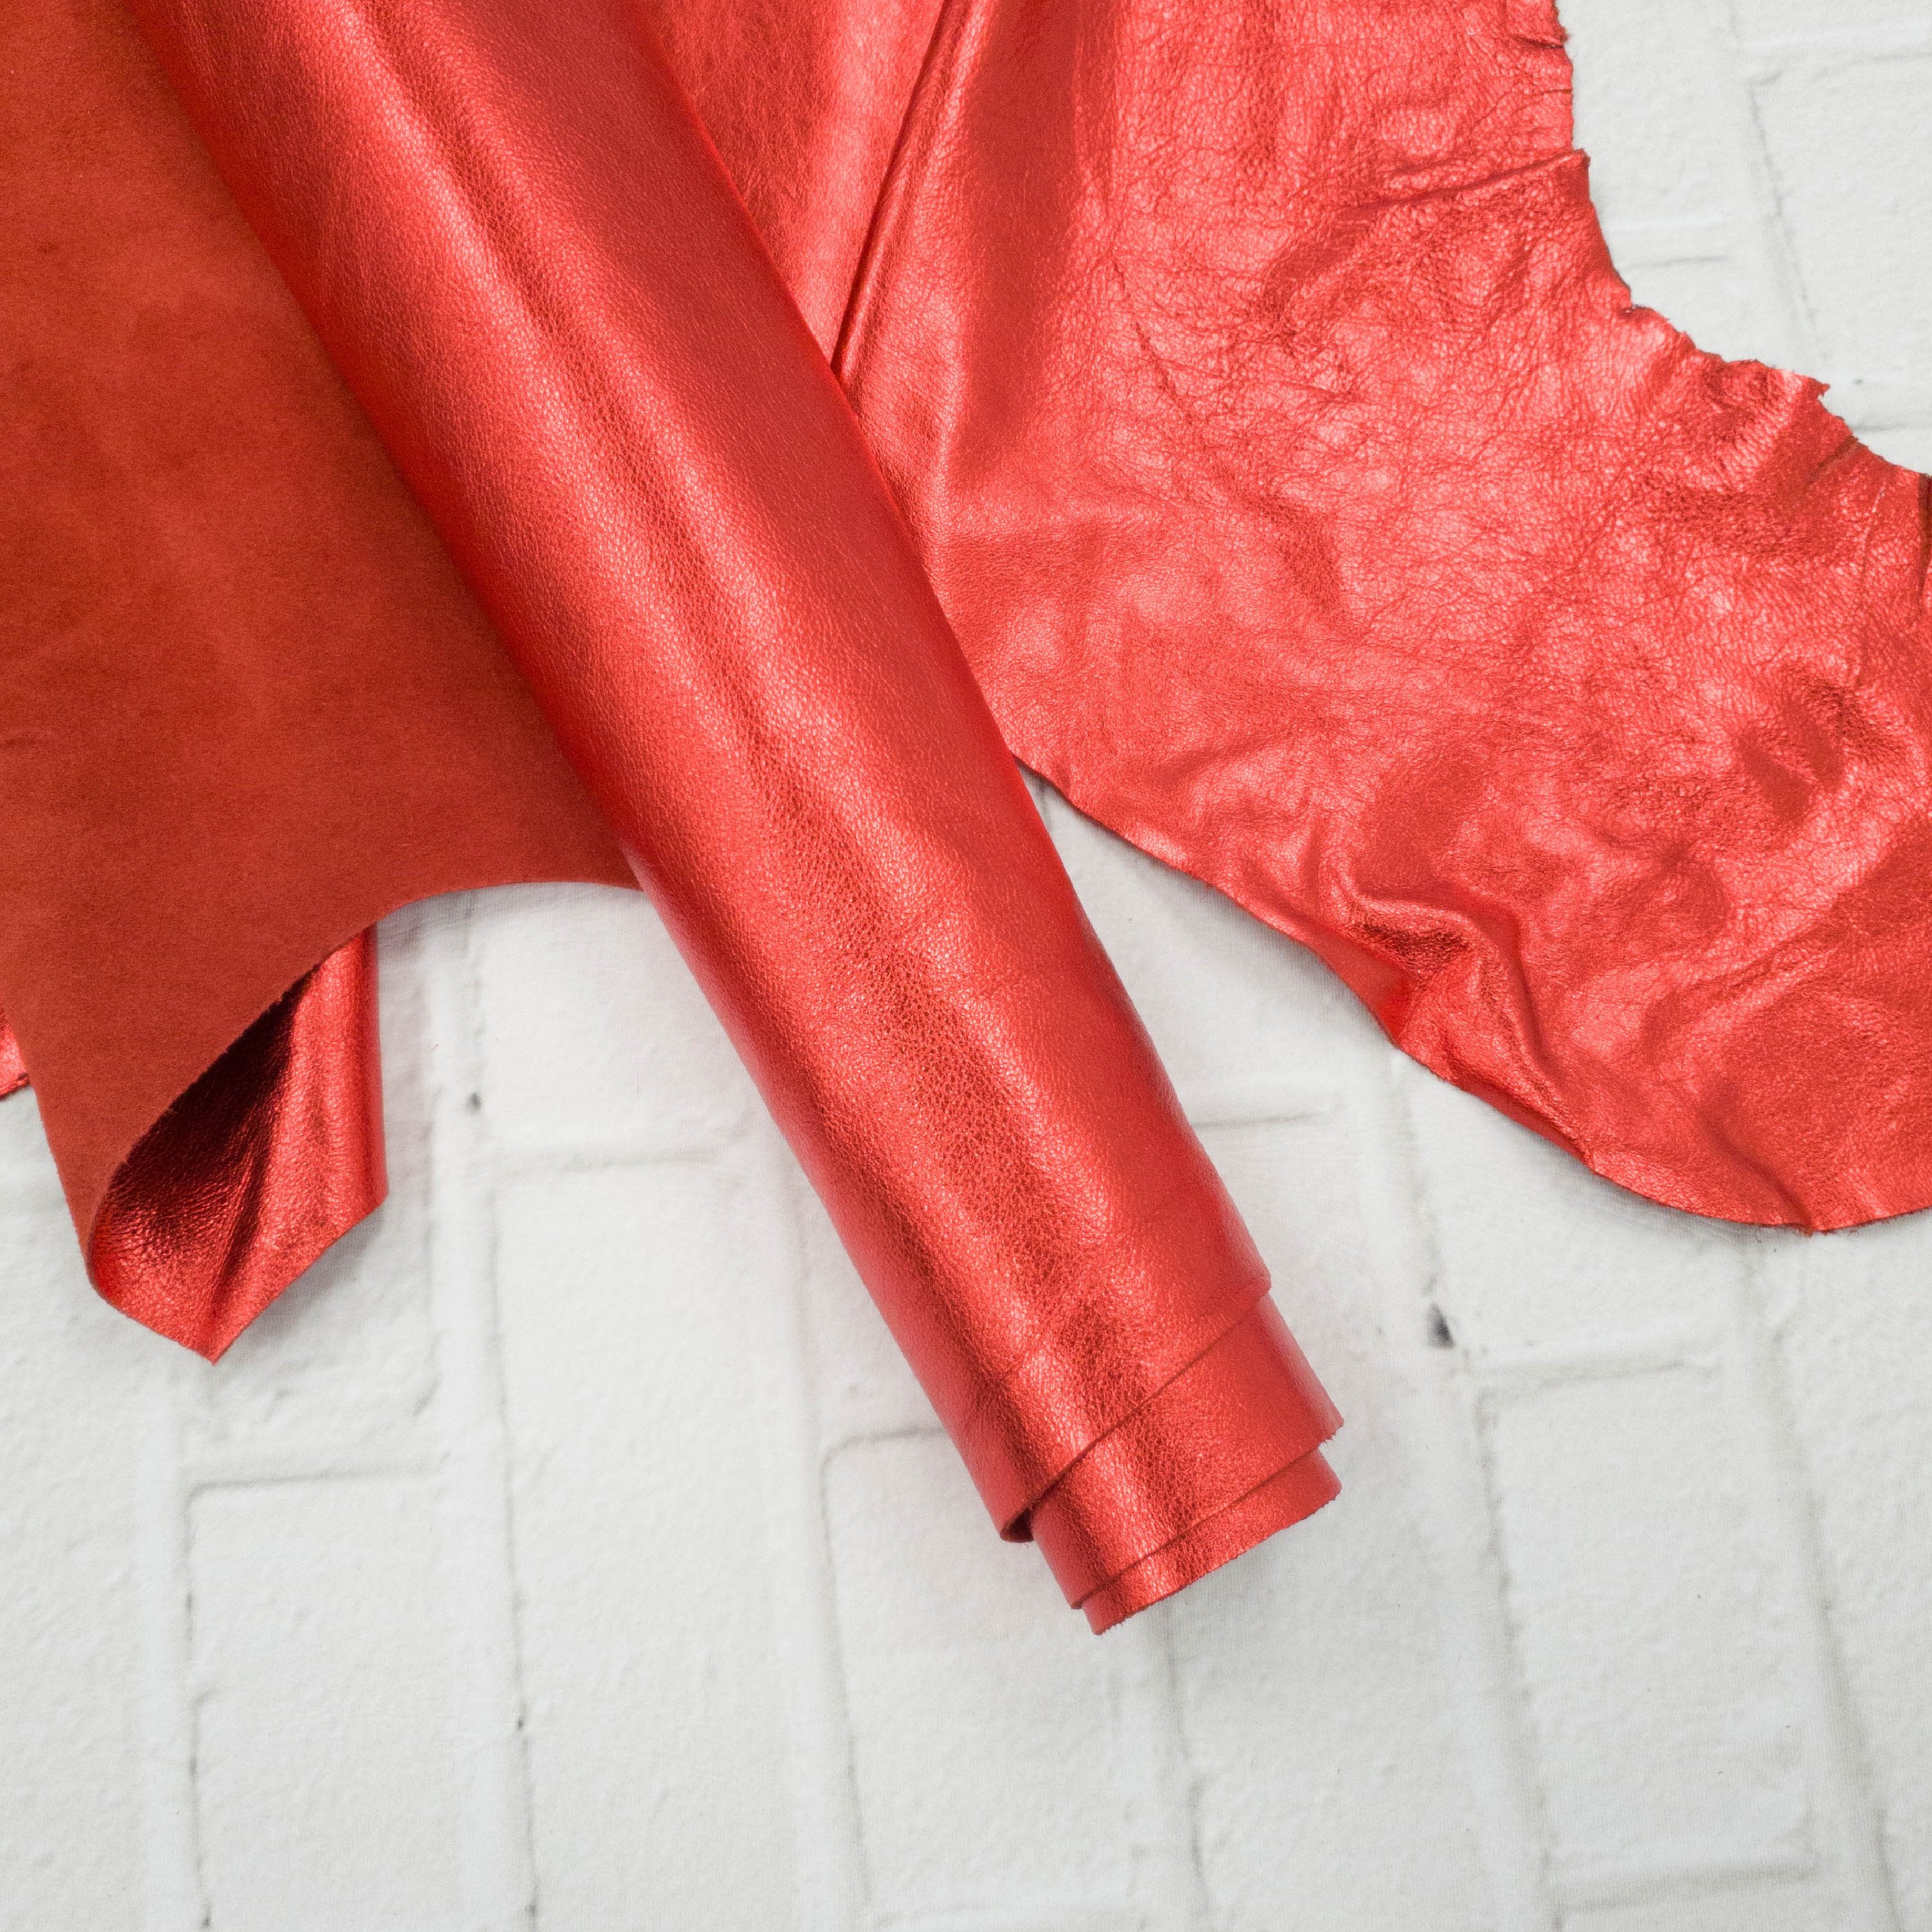 Metallic Red Leather Hides